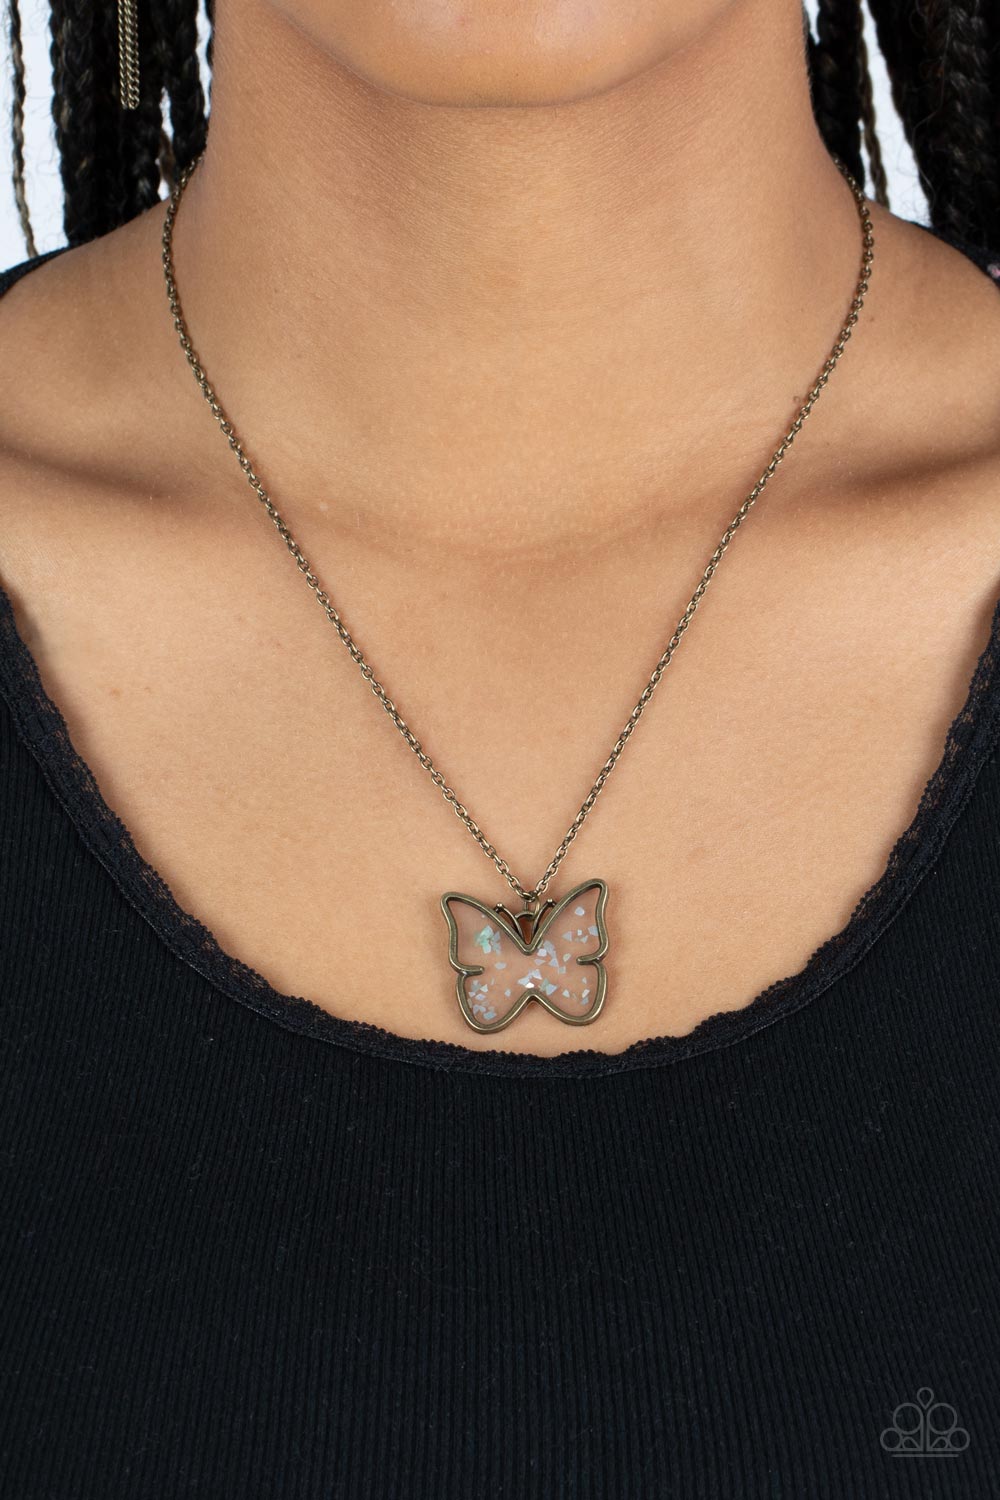 Gives Me Butterflies - Brass Paparazzi Necklace